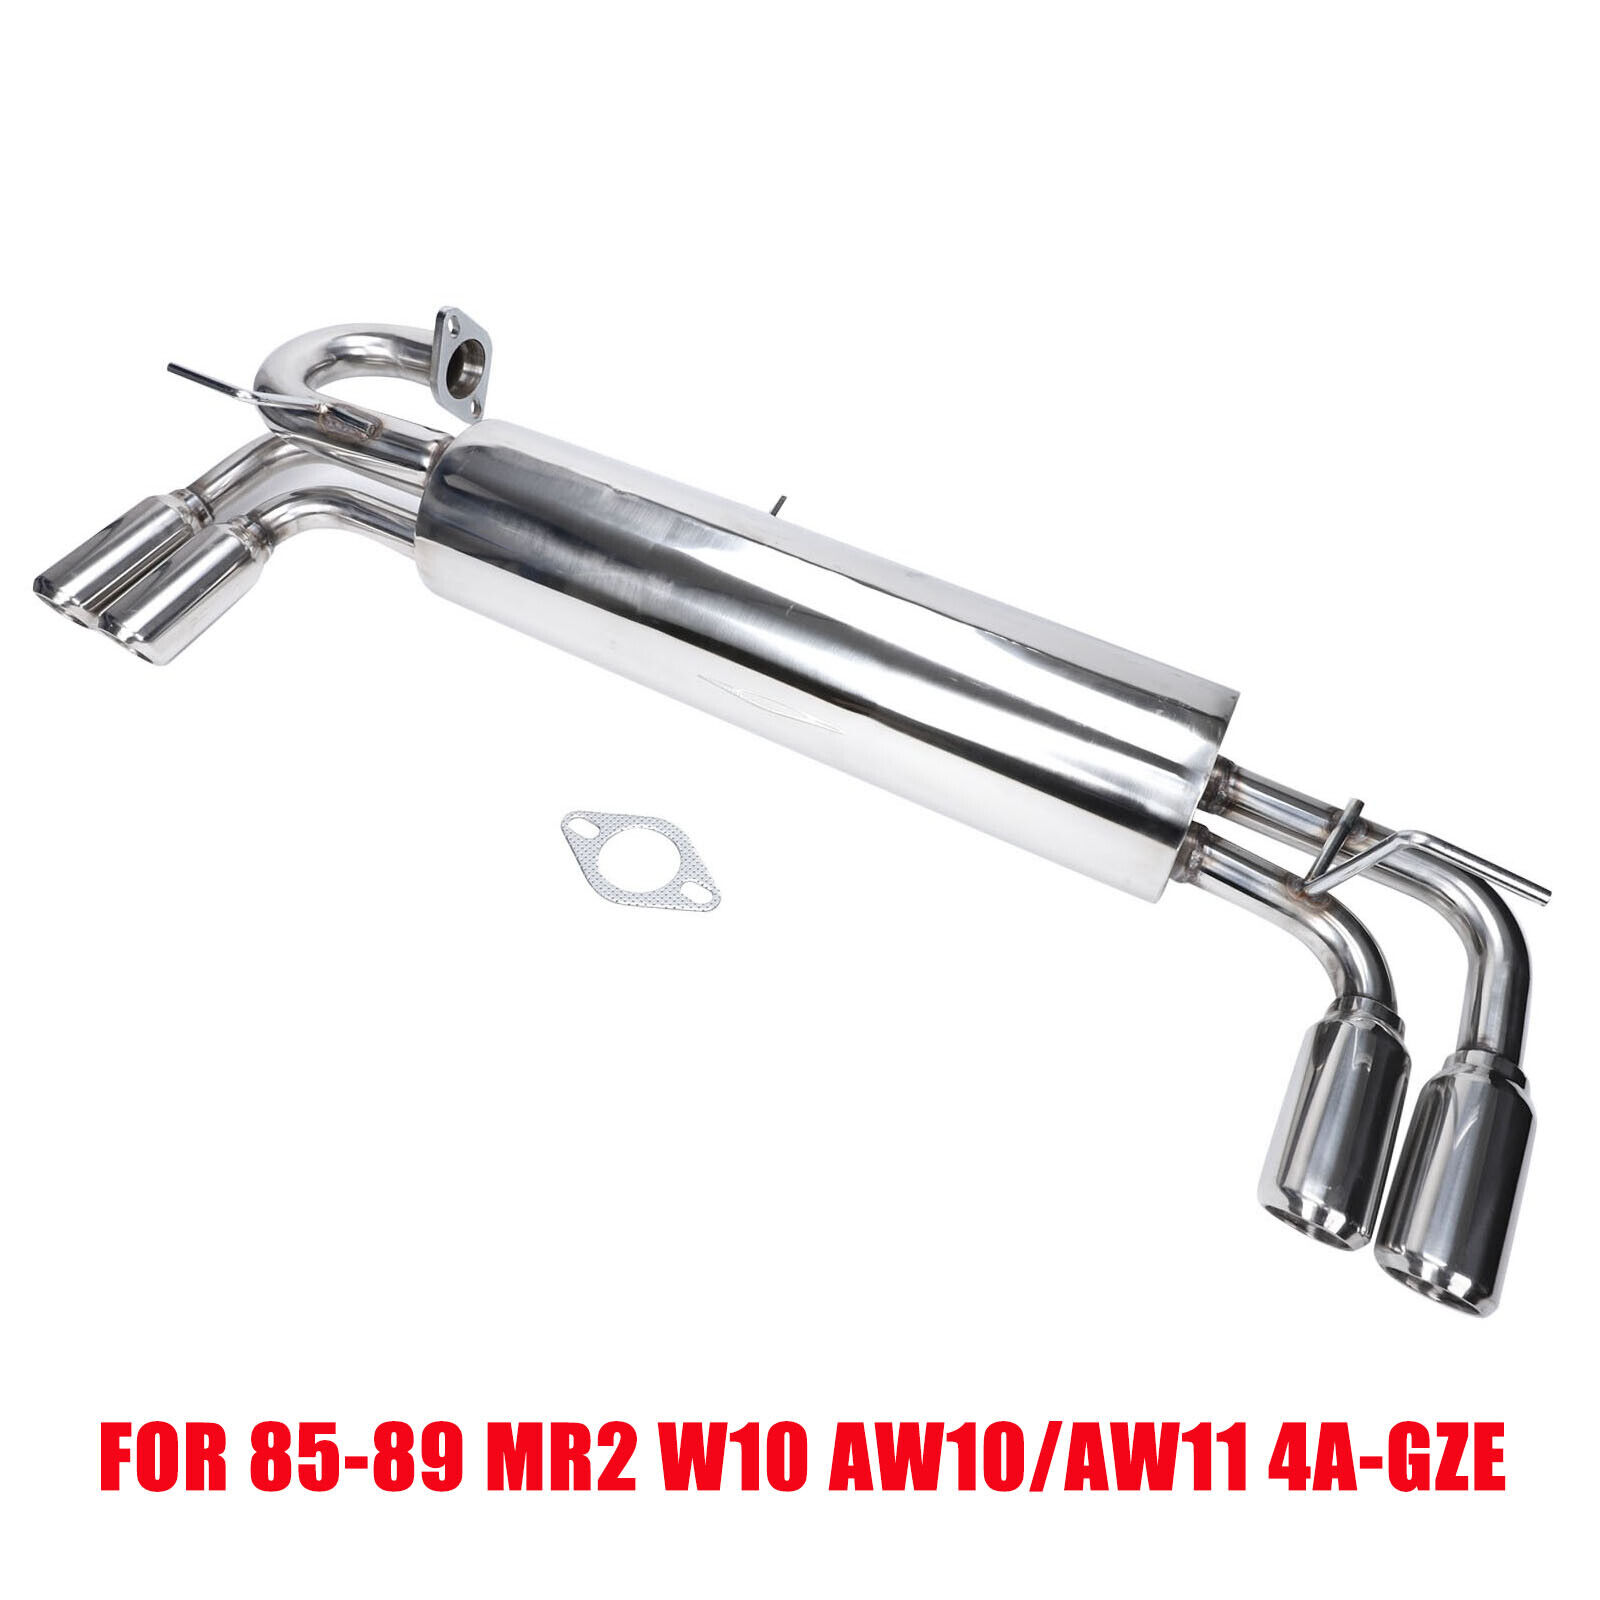 DUAL PATH CATBACK MUFFLER EXHAUST SYSTEM FOR 85-89 MR2 W10 AW10/AW11 4A-GZE